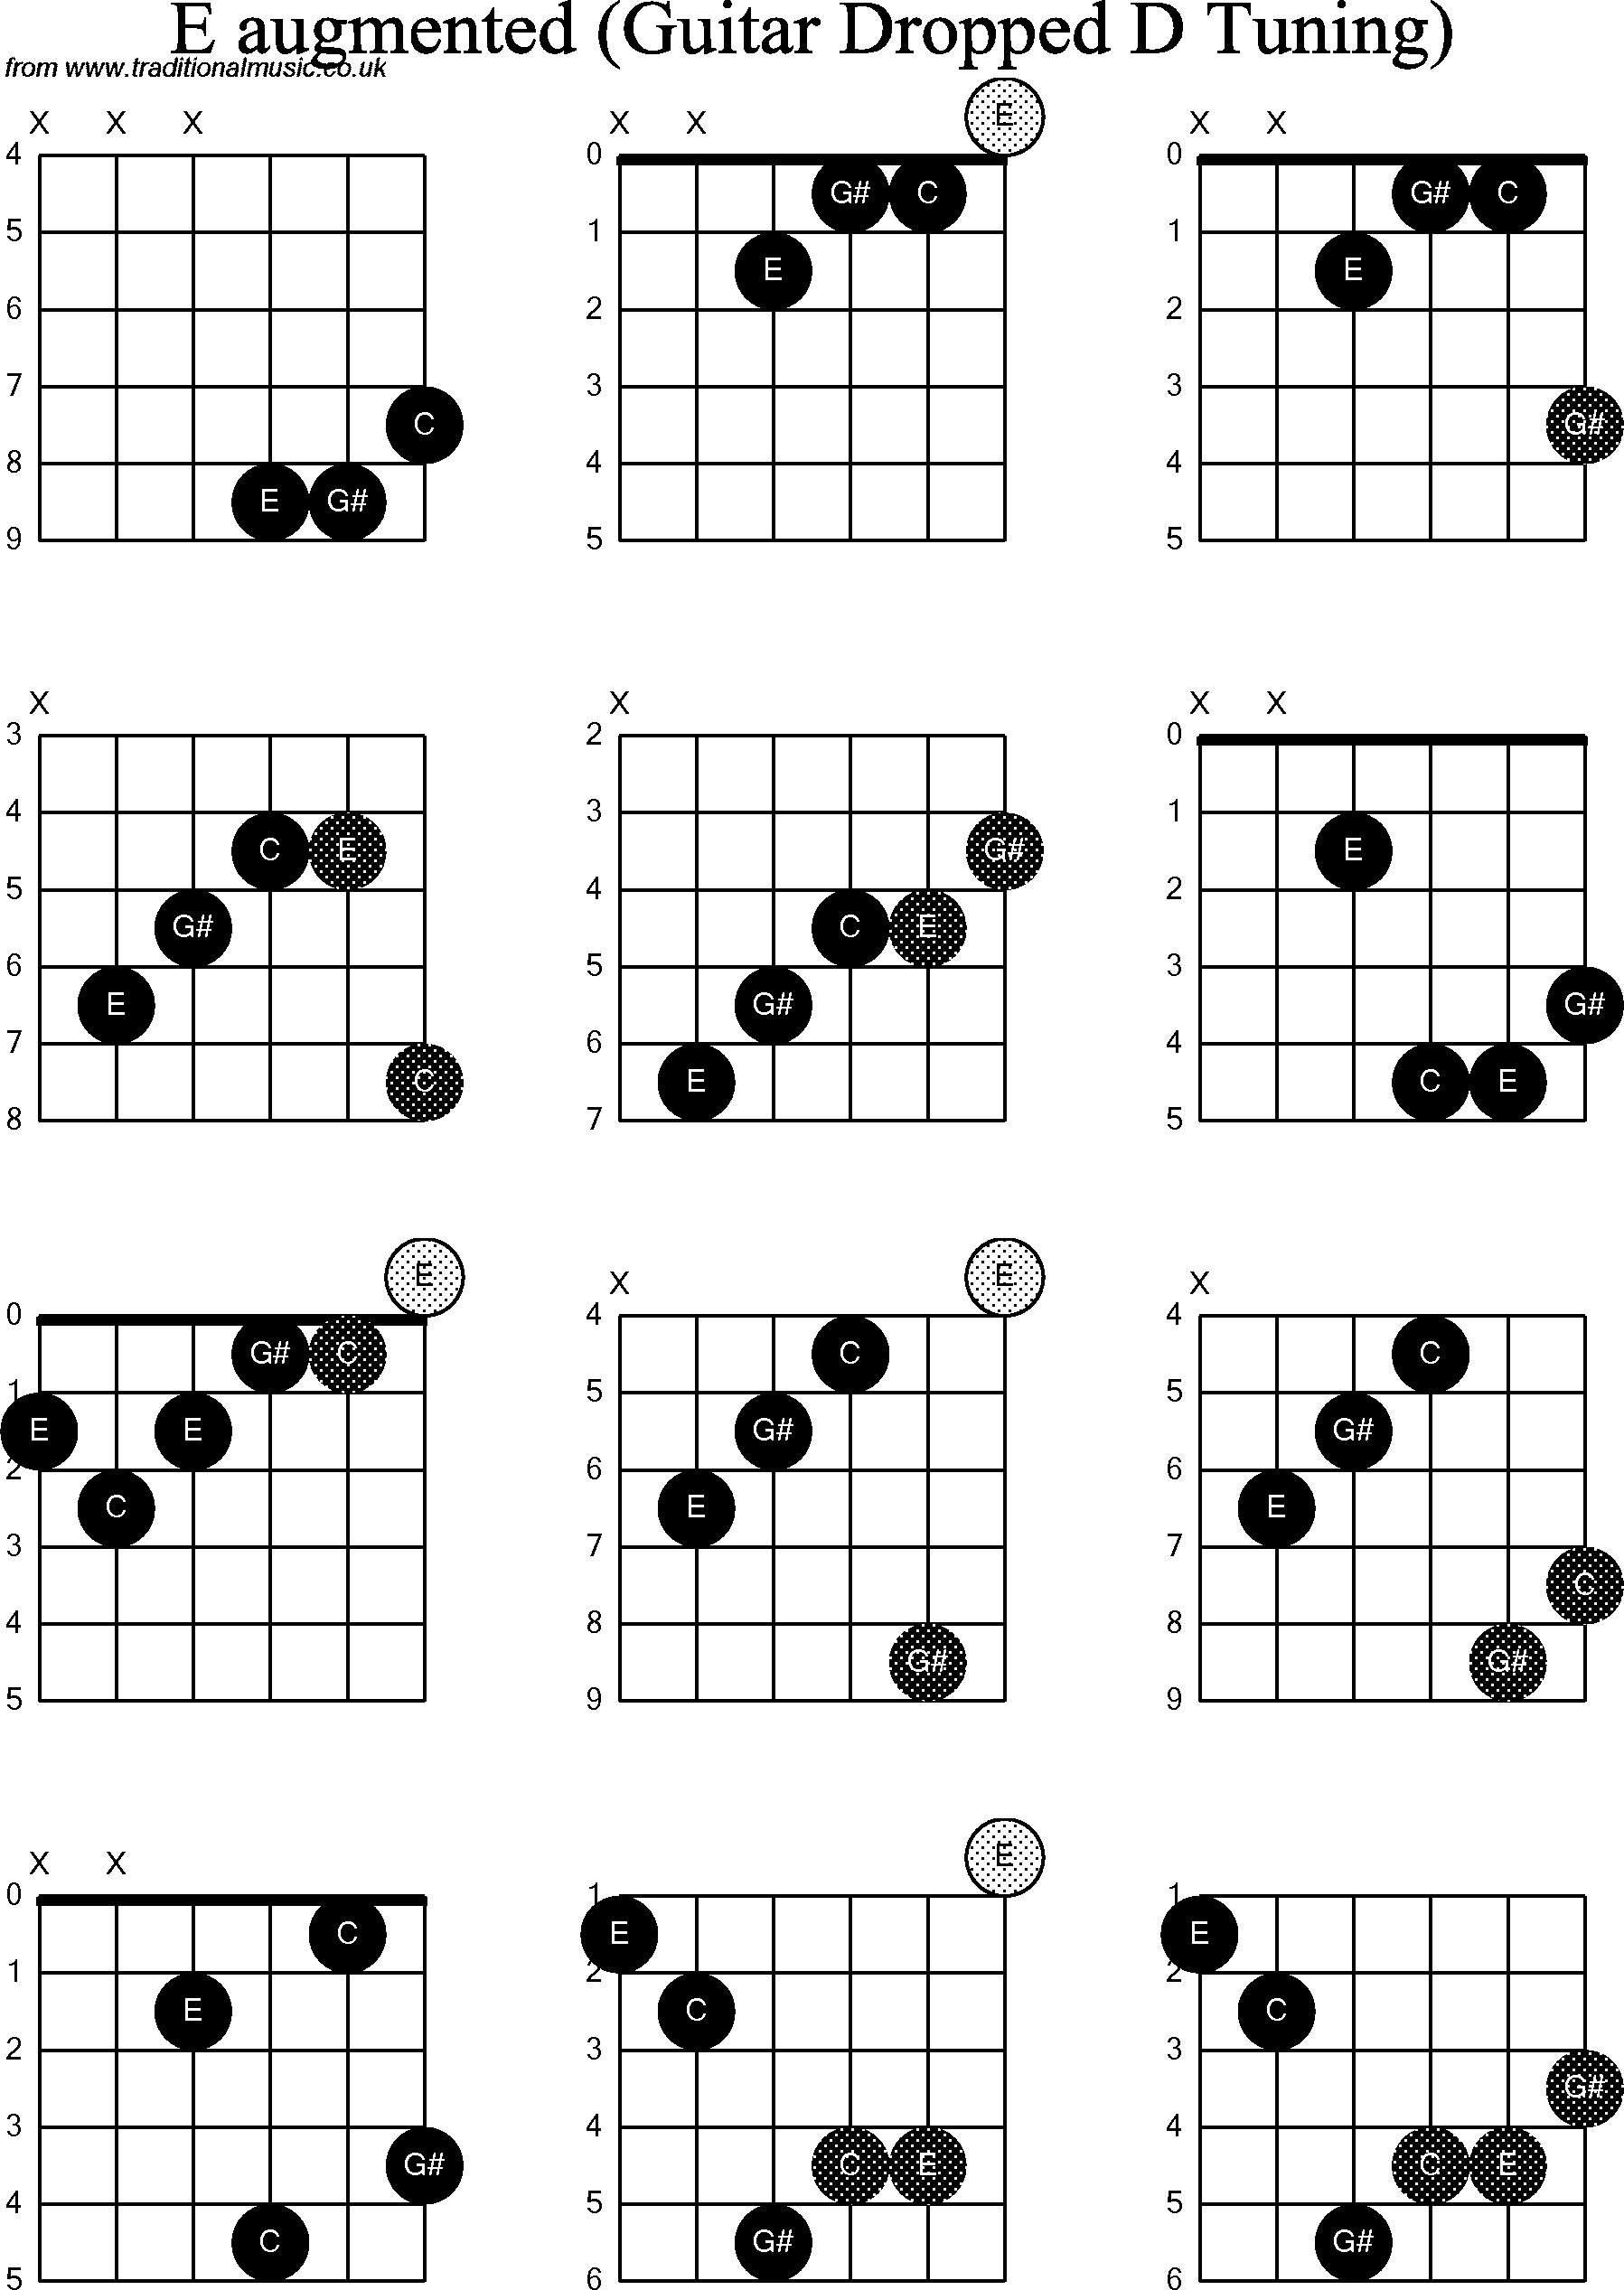 Chord diagrams for dropped D Guitar(DADGBE), E Augmented